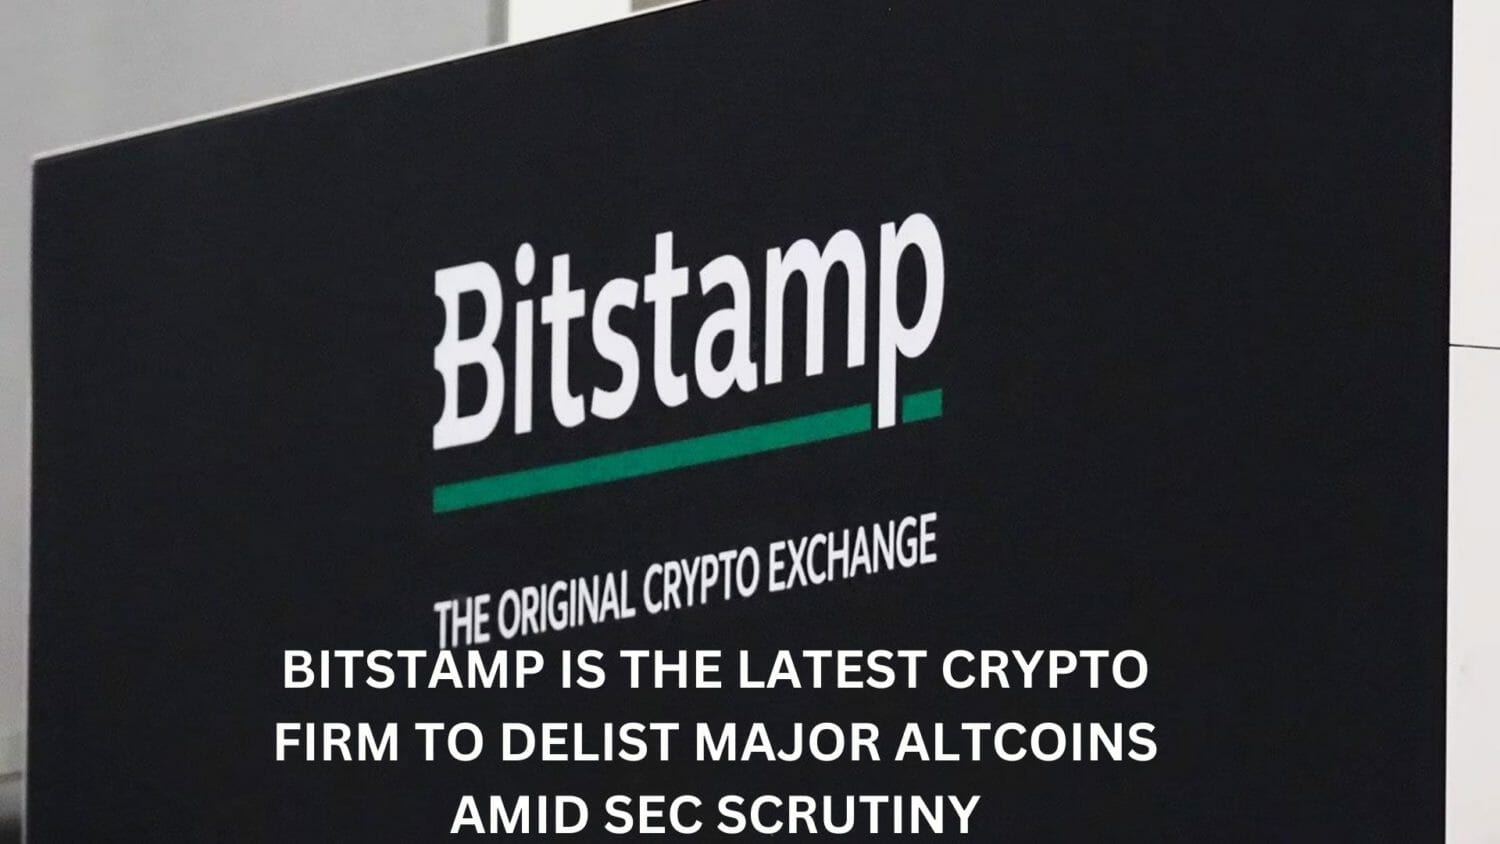 Bitstamp Is The Latest Crypto Firm To Delist Major Altcoins Amid Sec Scrutiny